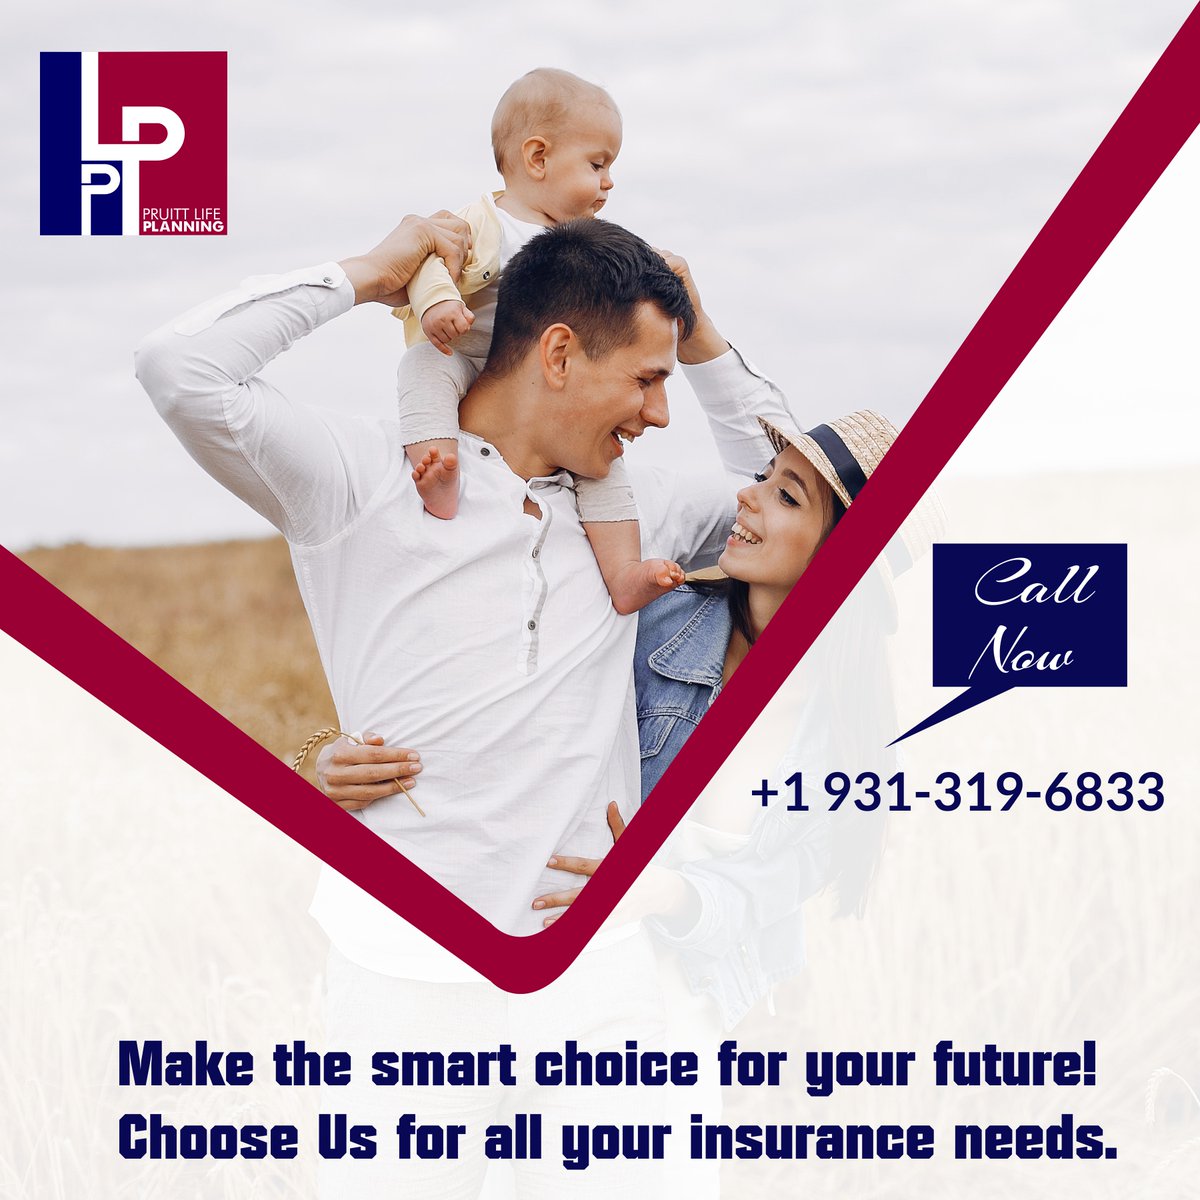 Let's navigate the complexities of financial planning together, ensuring your goals are within reach. Take the first step towards financial security today!

Call Us On +1 931-319-6833

#PruittLifePlanning #FinancialPlanning #SmartChoices #FinancialSecurity #WealthManagement